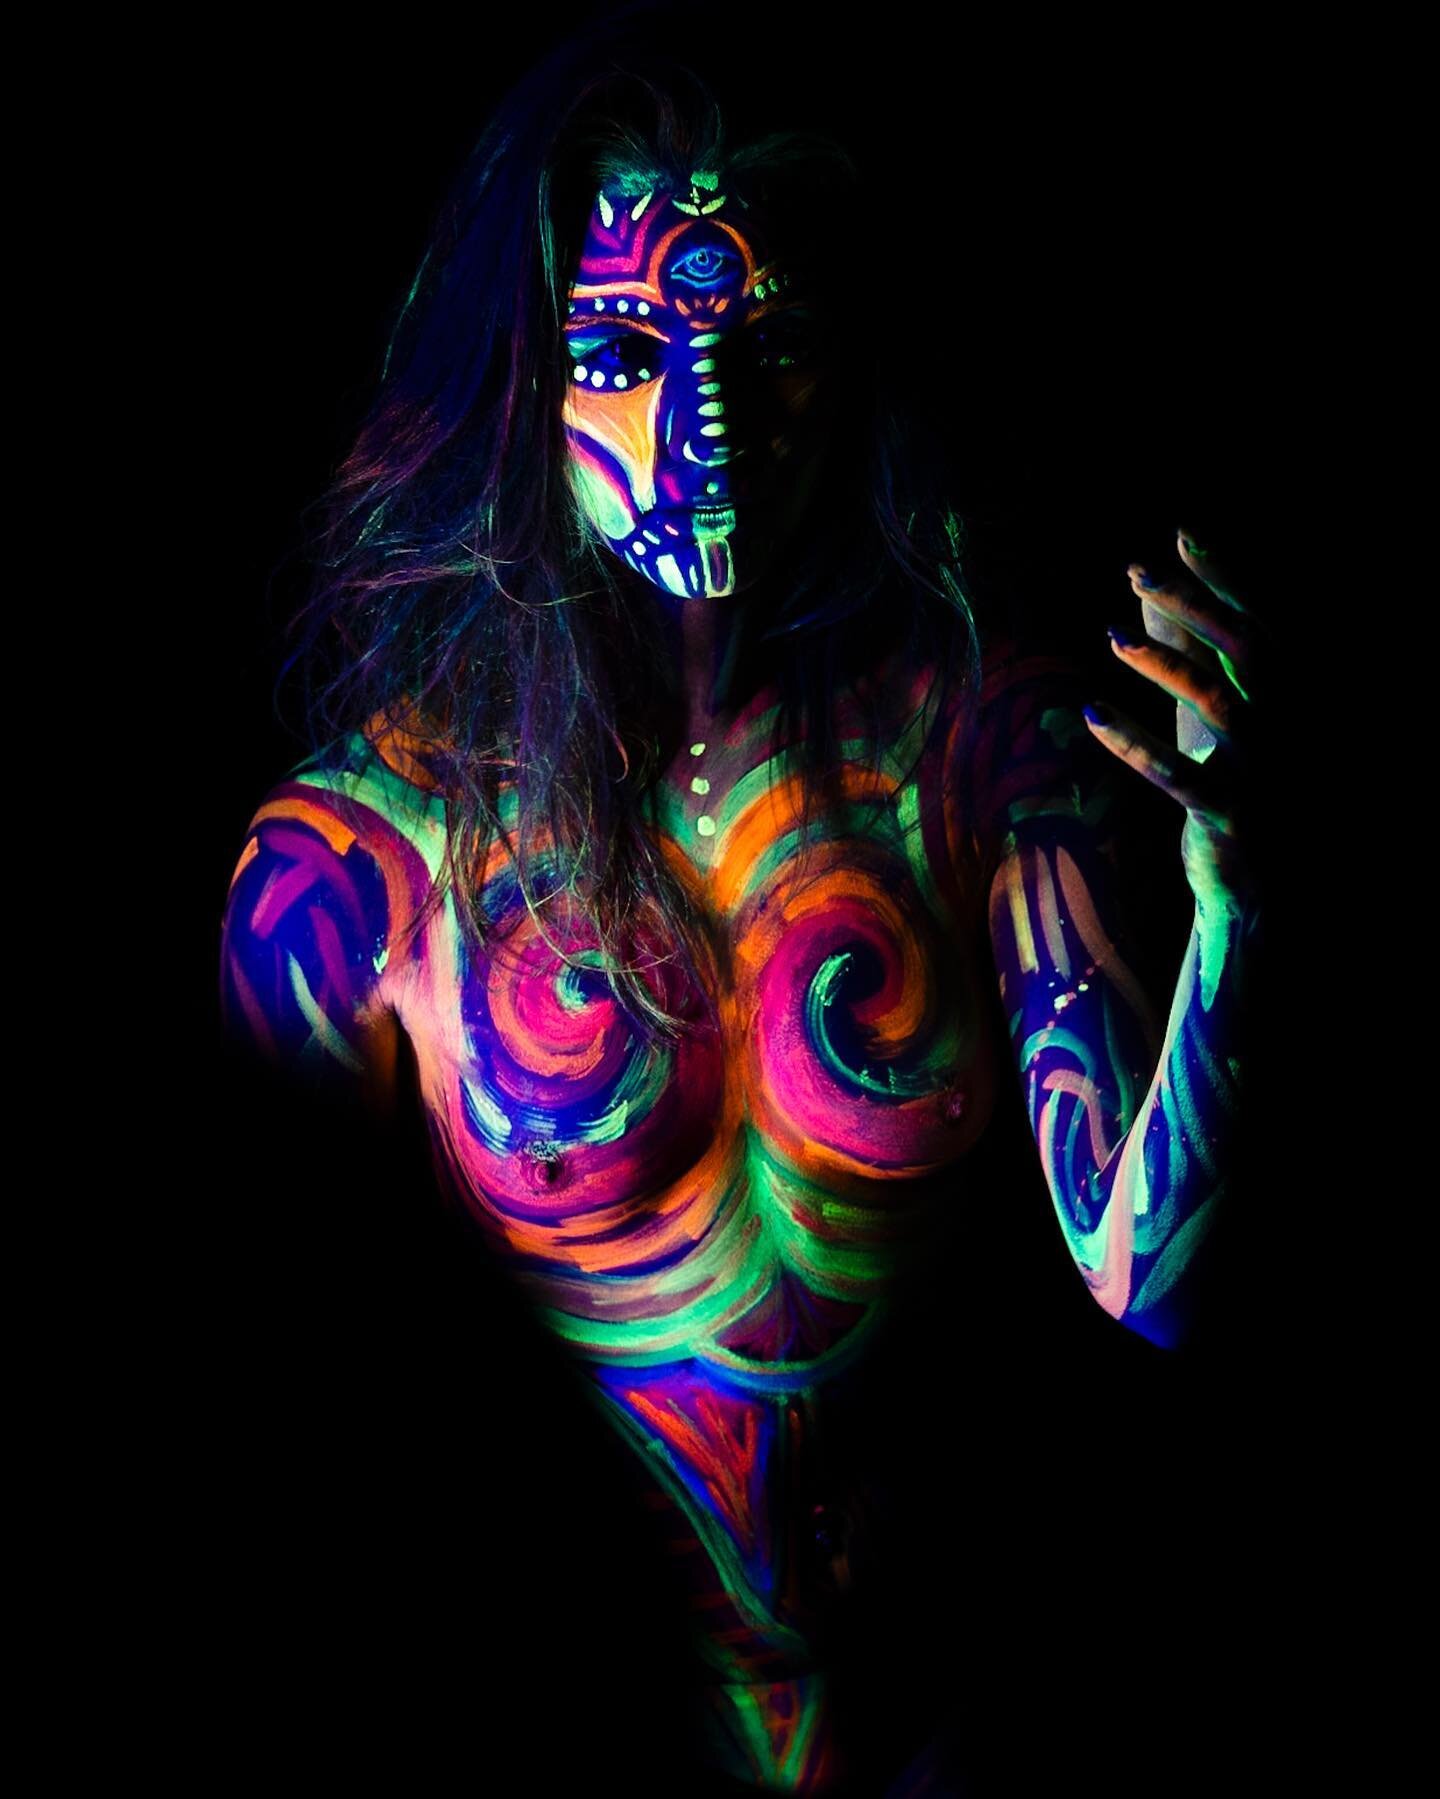 &quot;Feeling like a work of art with this fluo glow paint 🎨🌟

🙎🏼&zwj;♀️ @verapatelli 
📸 @stefano.freti 
🏡 @fc_studiofotografico 

#bodyart #fluopaint #canvas
#bodypaintfluorescente
#neonbodypaint
#bodypaintglow
#fluocolors
#bodypaintparty
#uvb